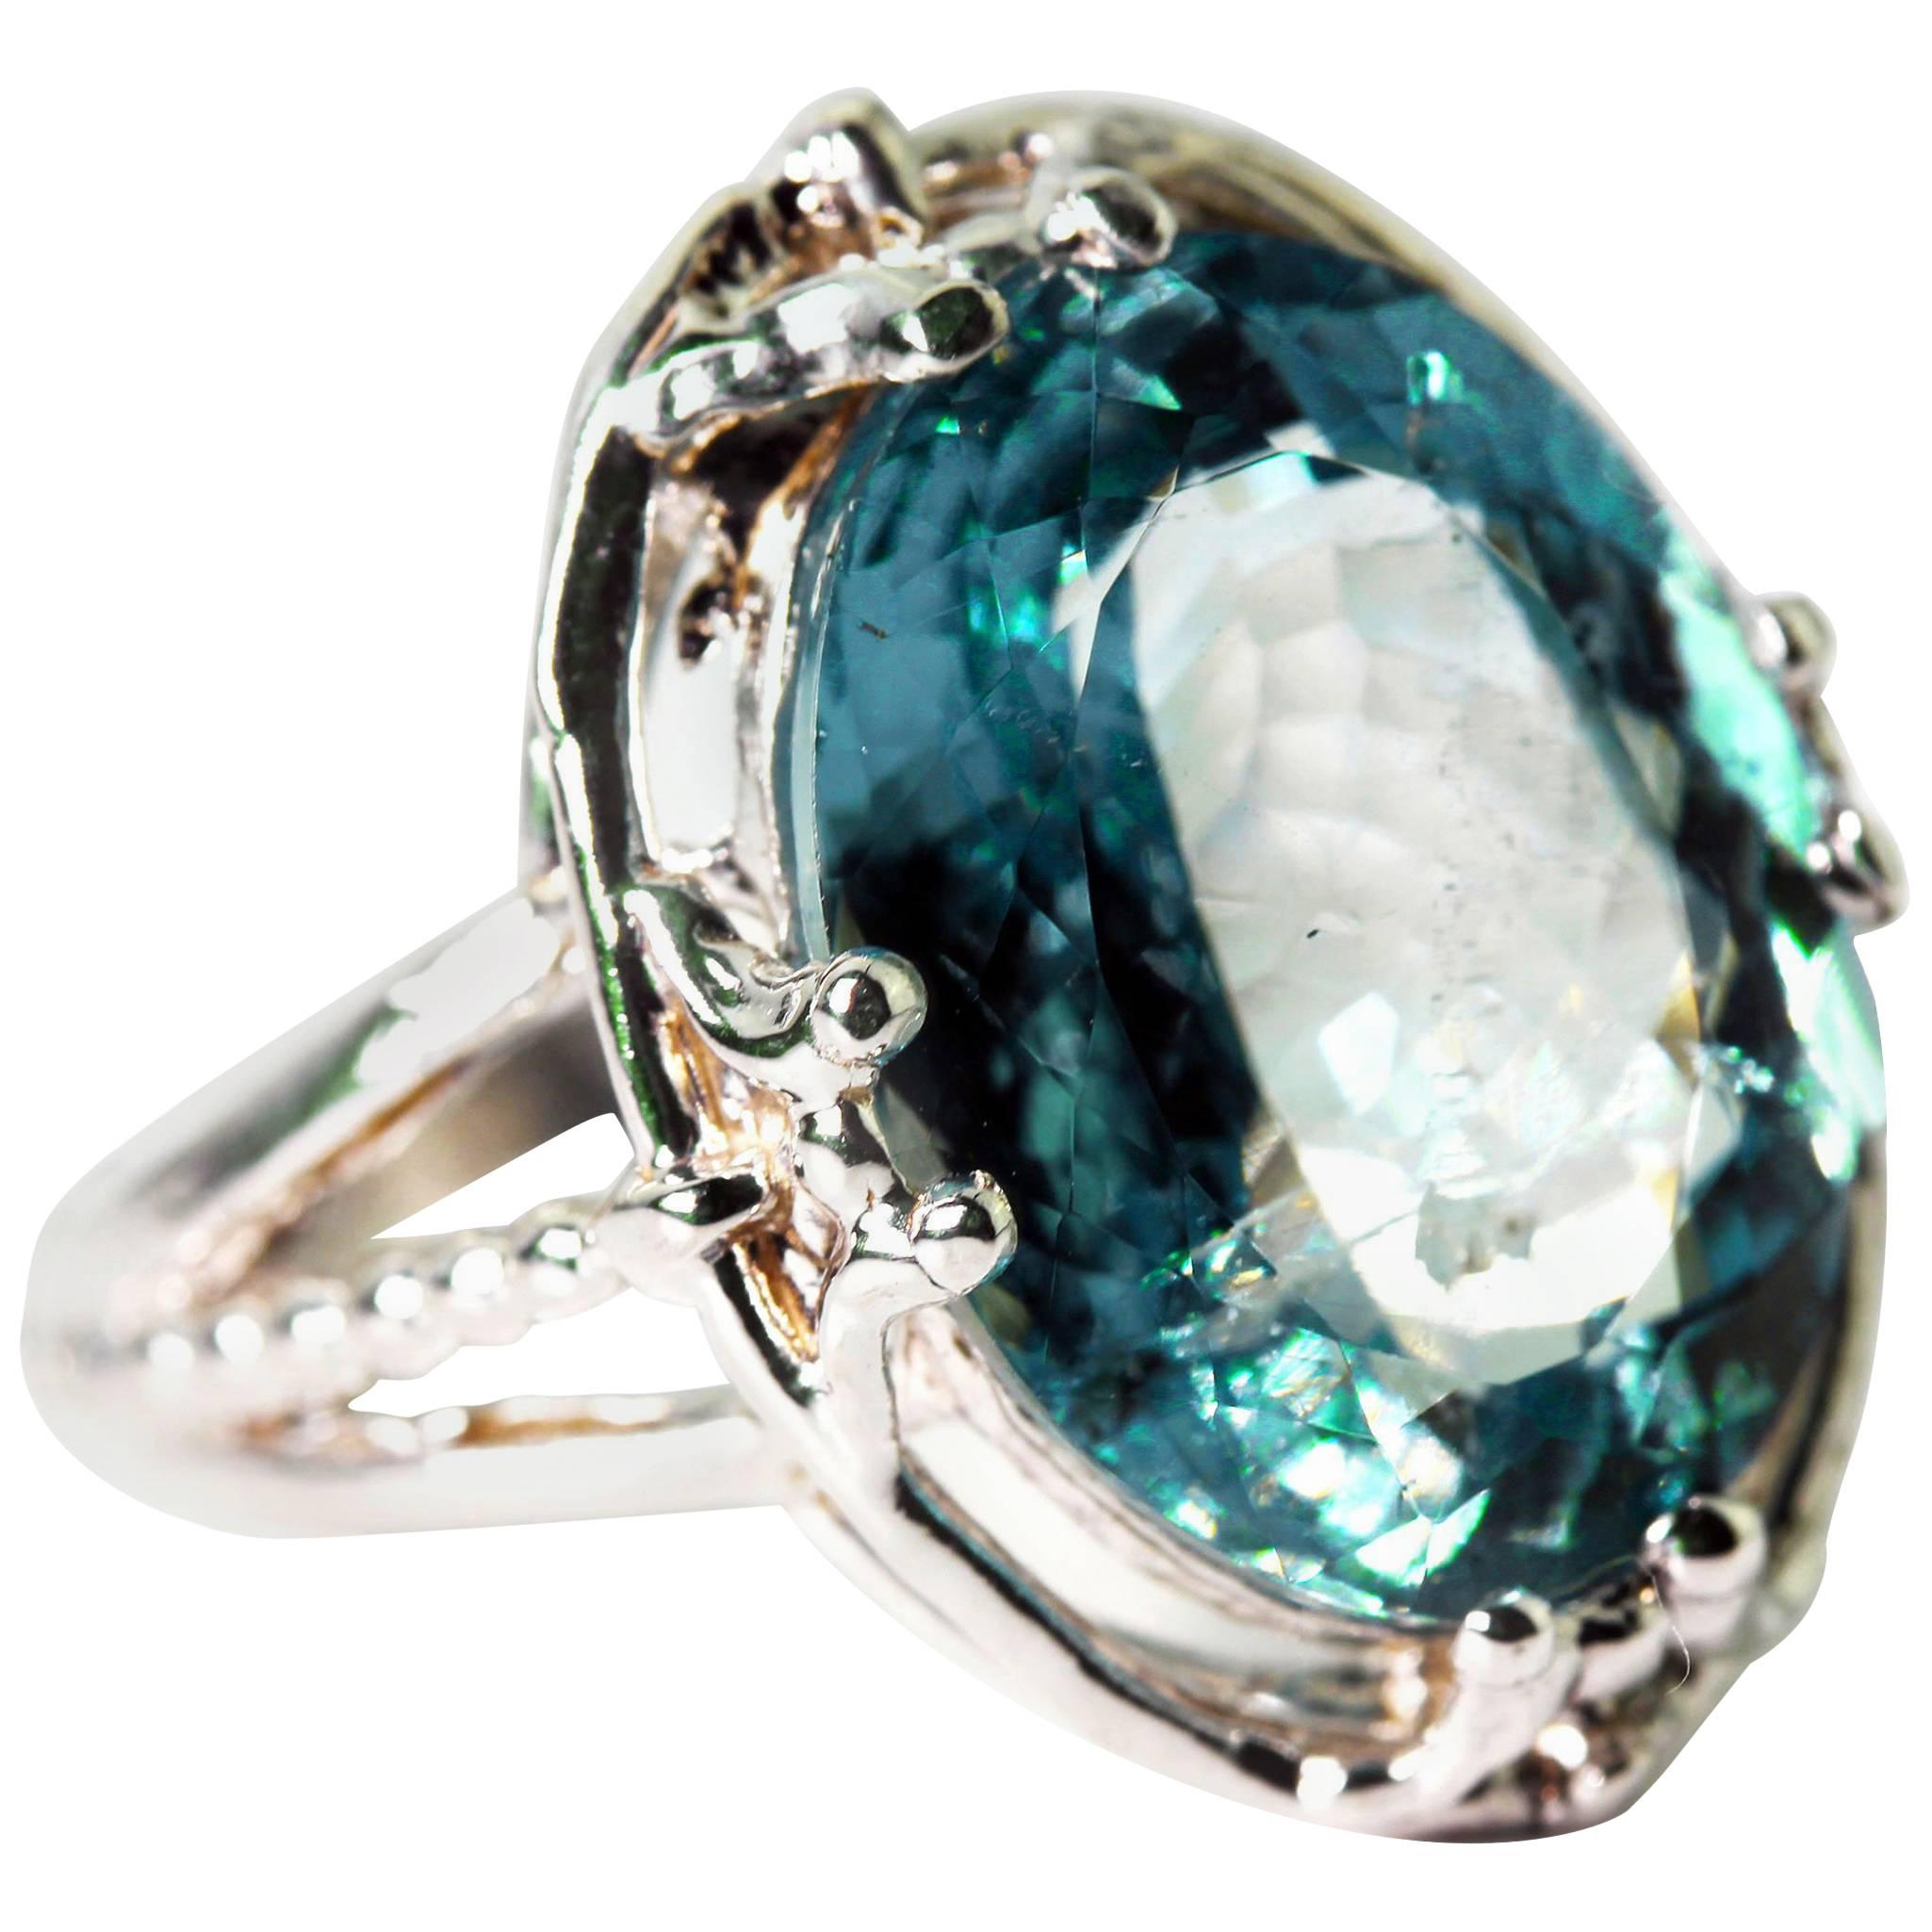 Bright sparkling natural intensely blue oval 8.18 carat natural Brazilian Aquamarine (15. 8 mm x 11.4 mm) is set in a sterling silver ring size 4.5 (sizable for free).  The natural inclusion highlights in the gem make it glitter extensively.     